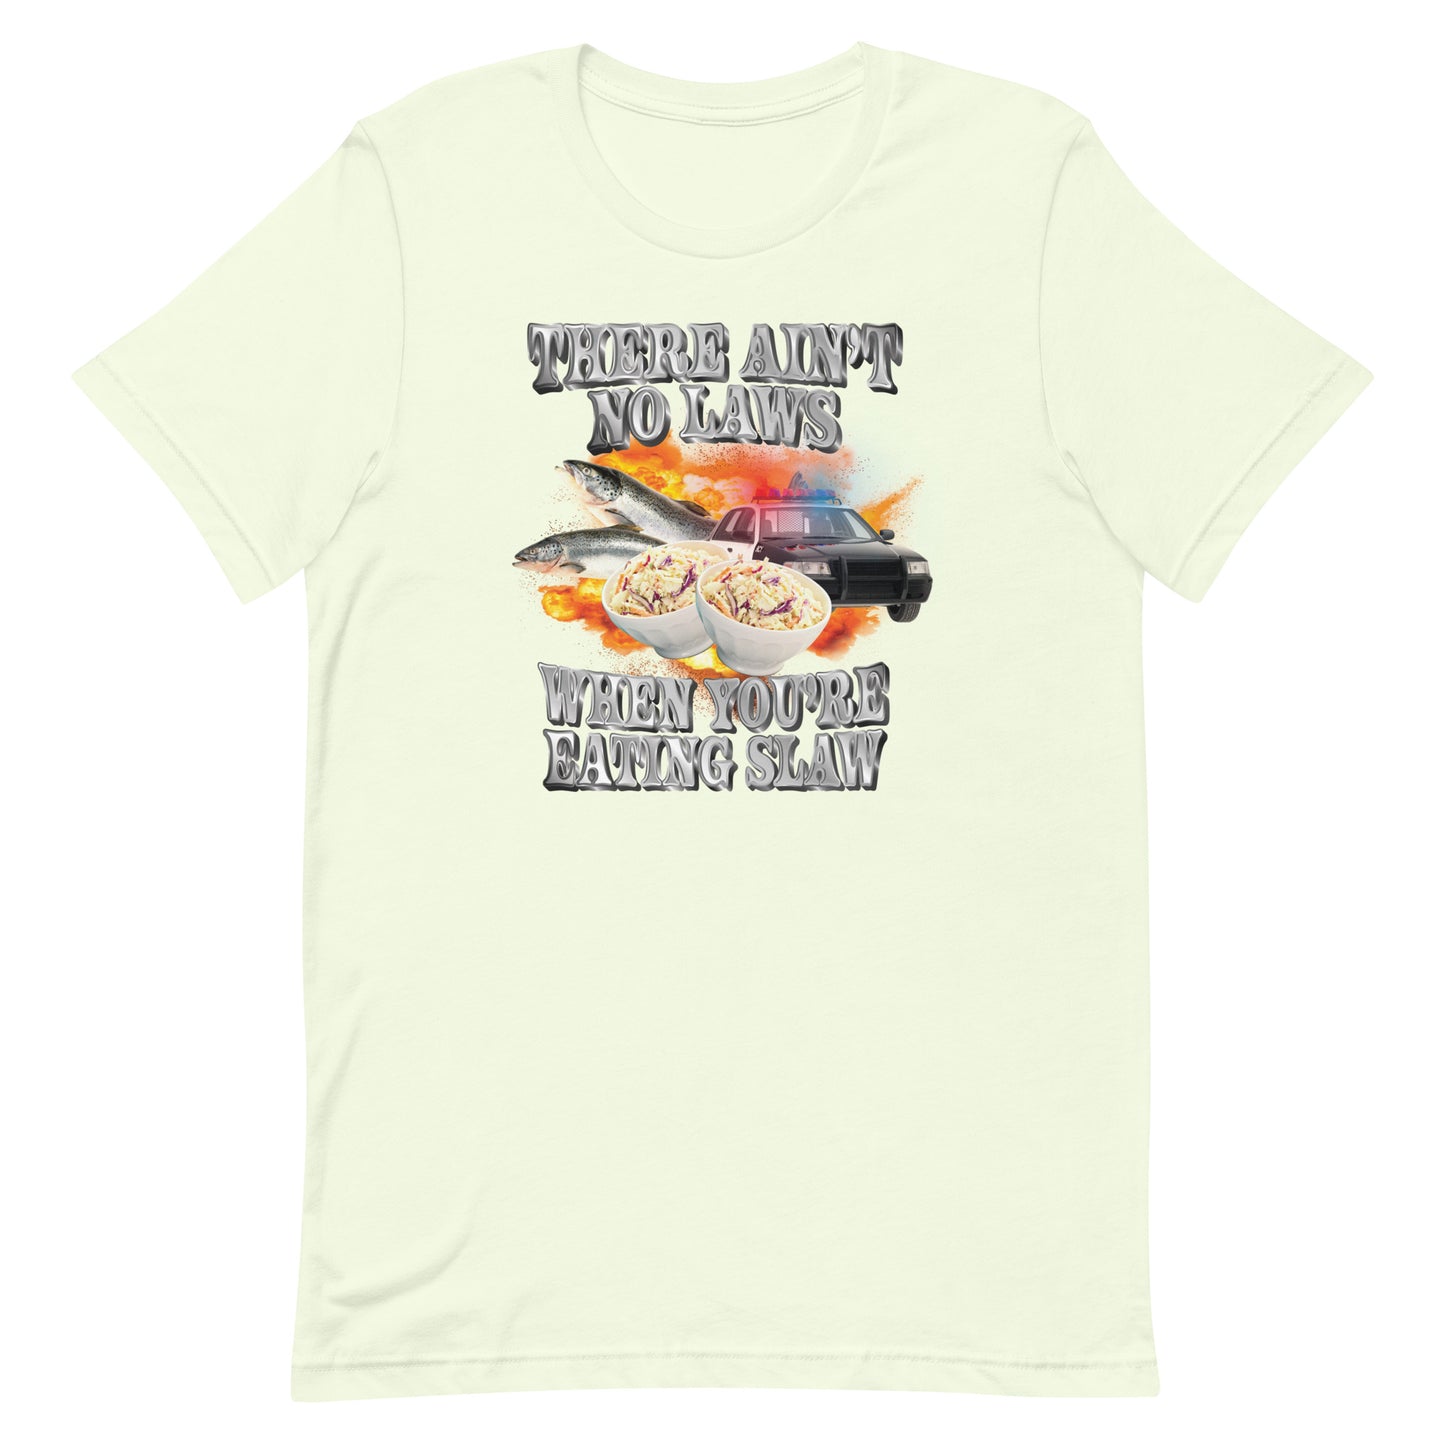 Ain't No Laws When You're Eating Slaw Unisex t-shirt